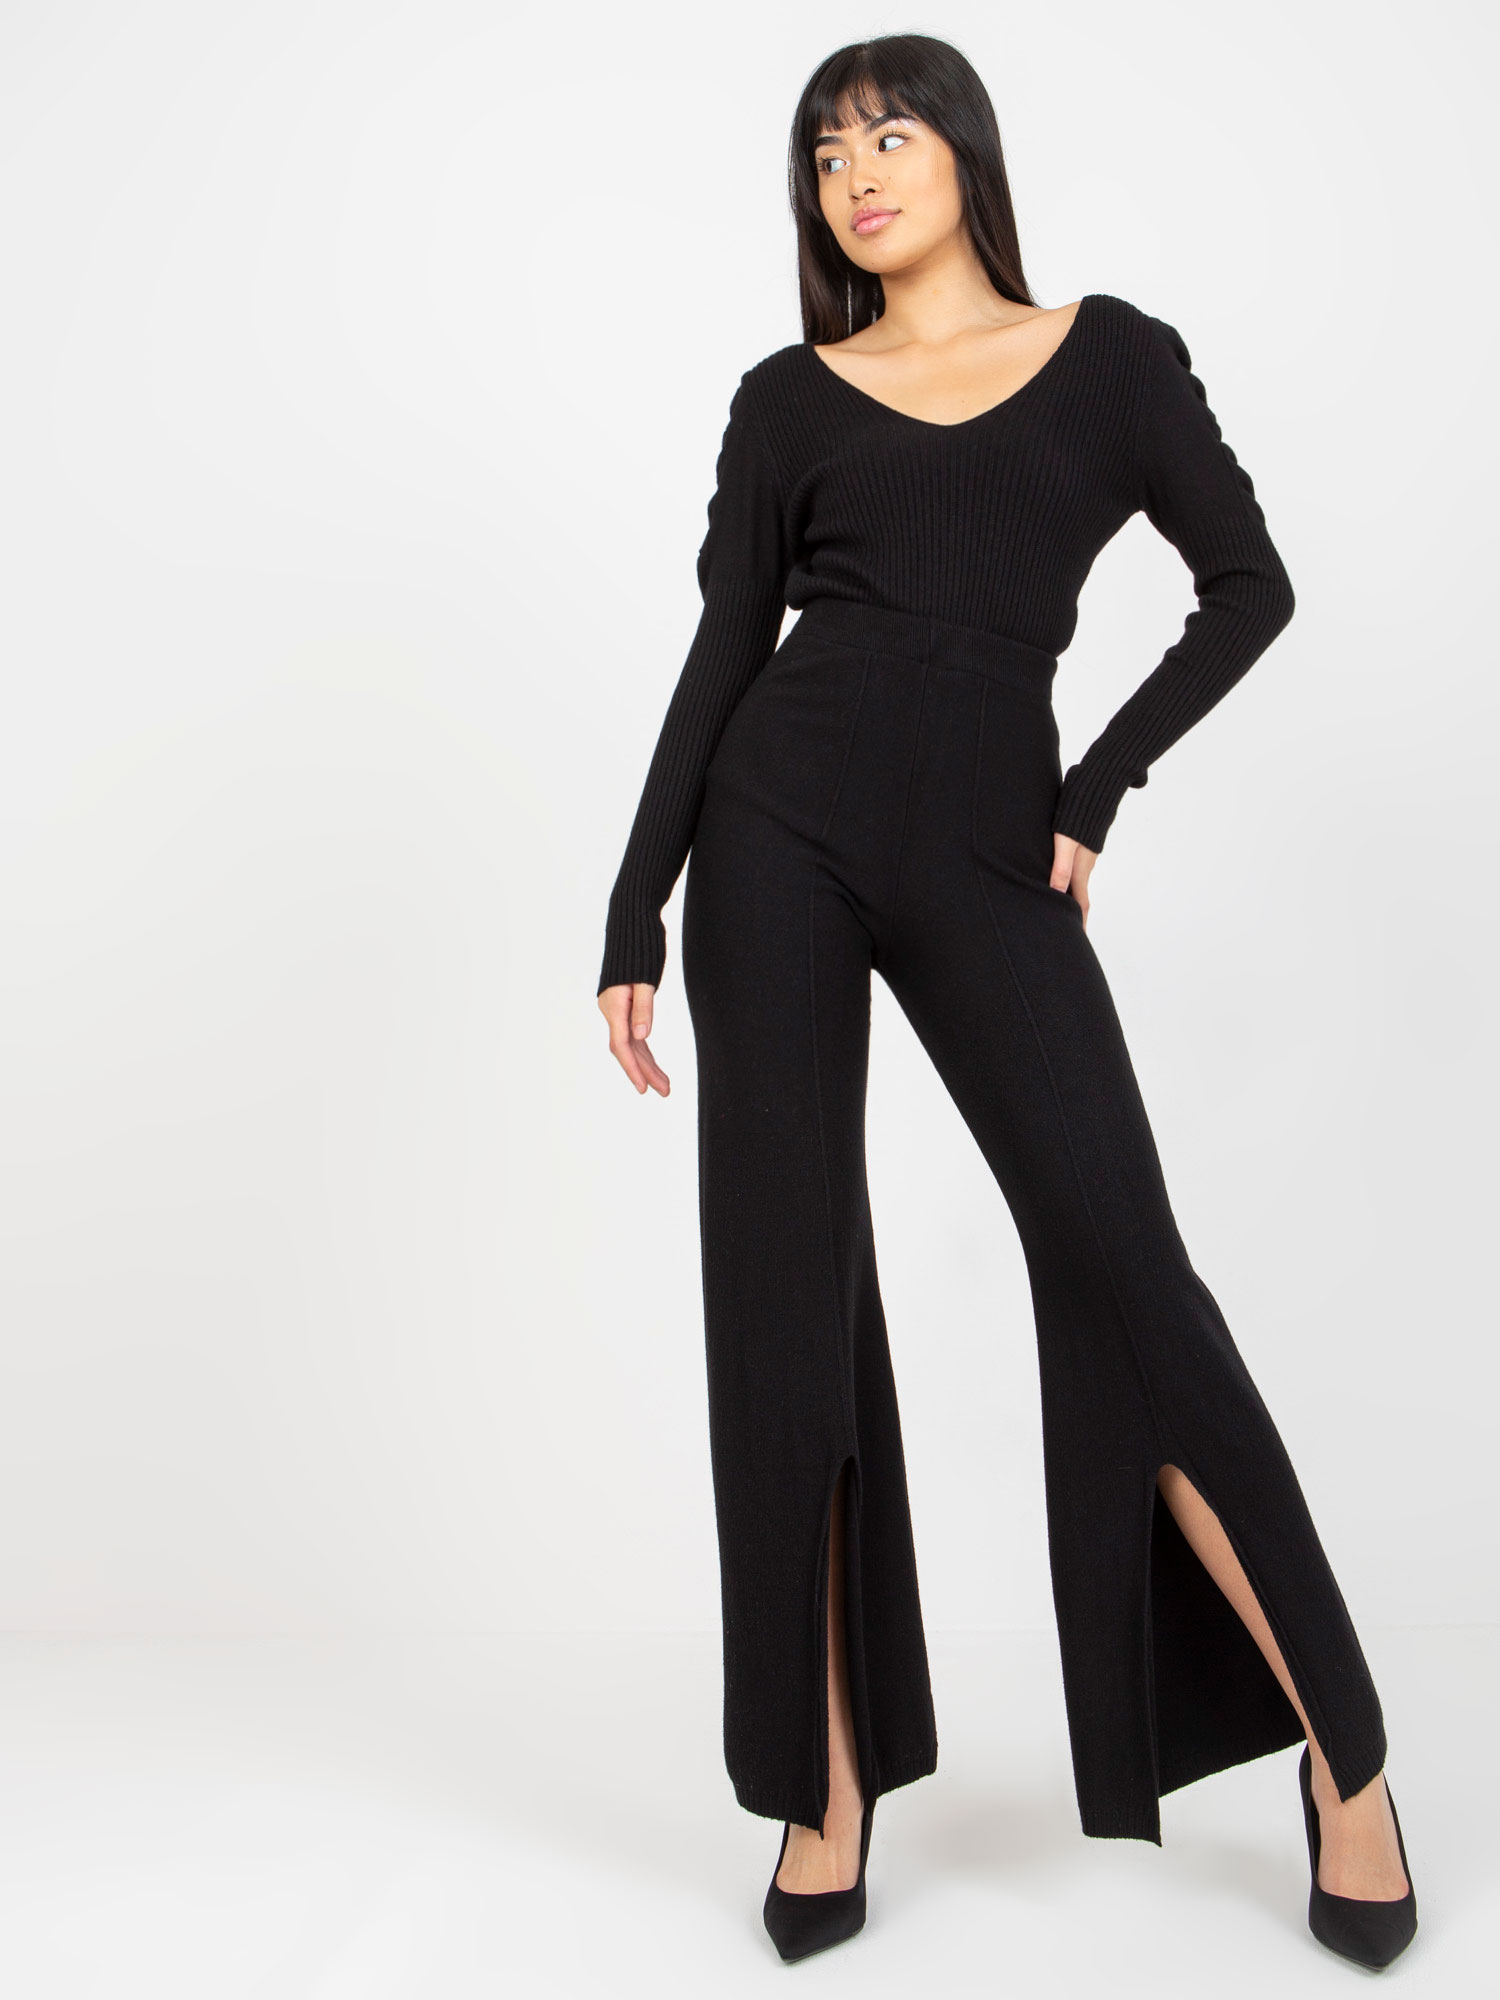 Black knitted trousers with high waist